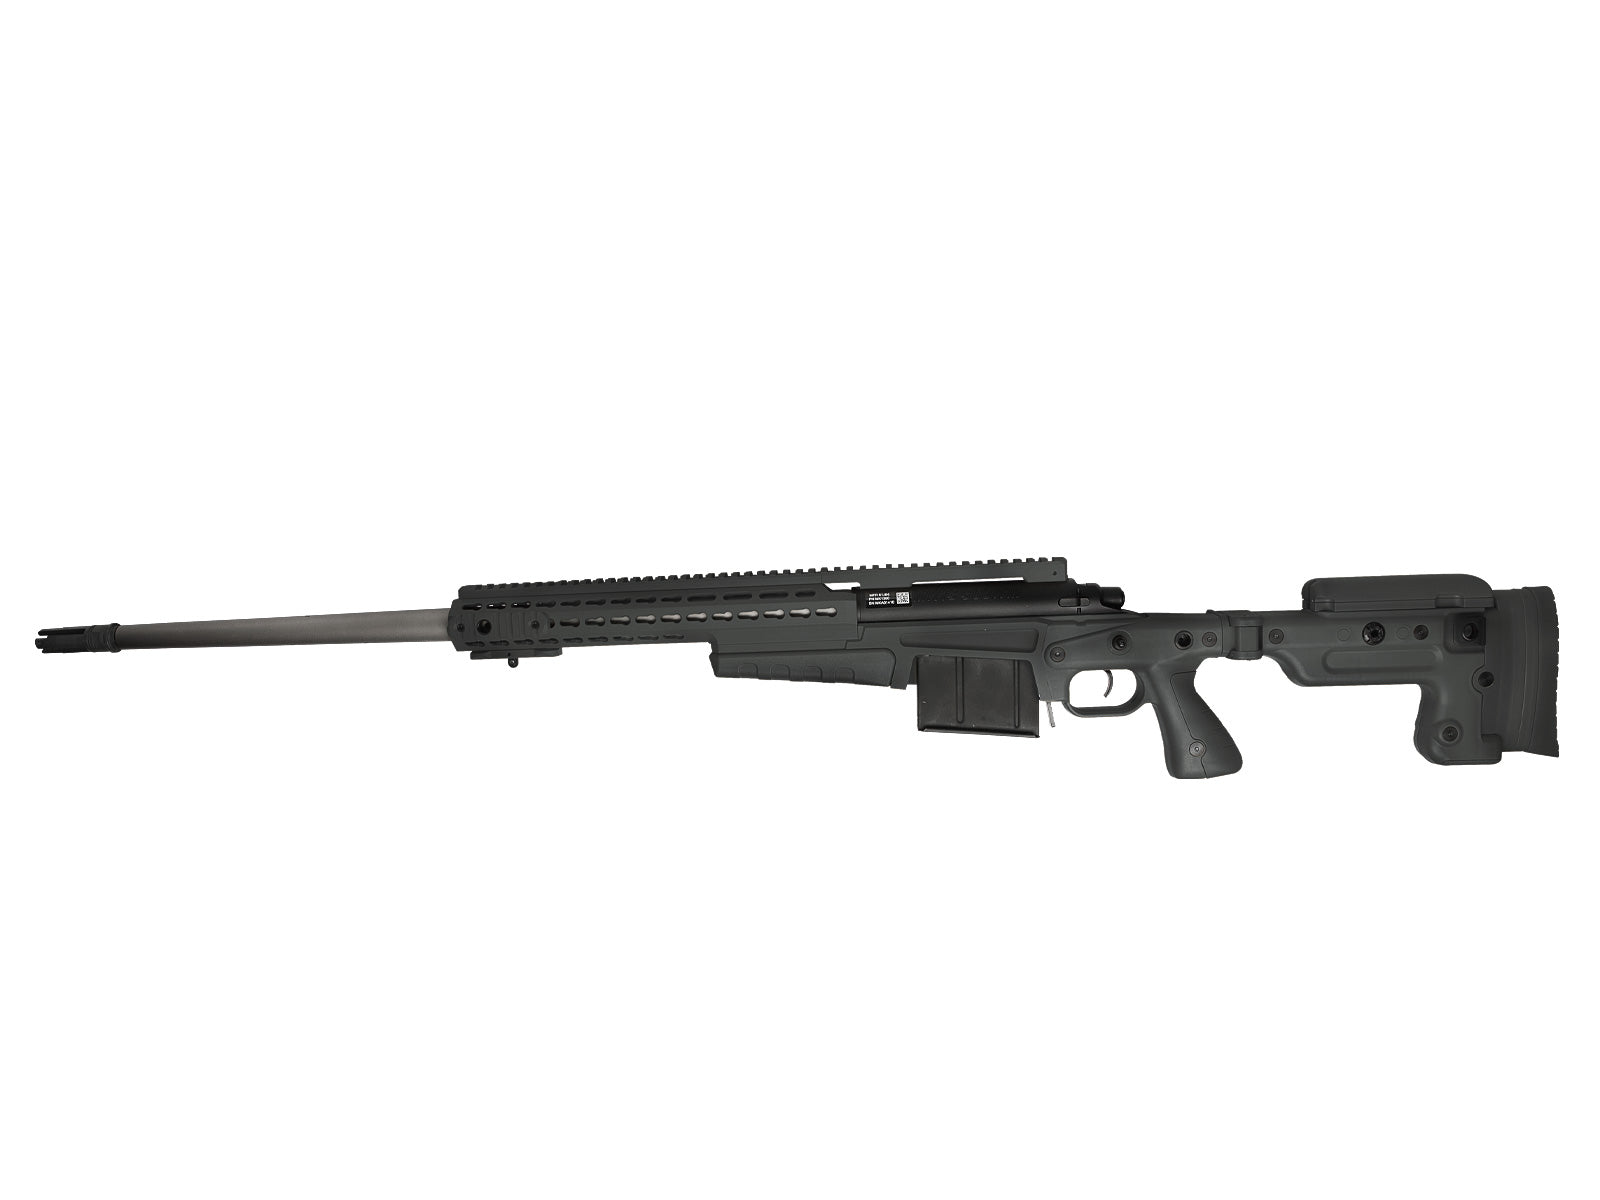 ASG Accuracy International MK13 Mod 7 Spring Power Sniper Rifle – Black | Action Sport Games